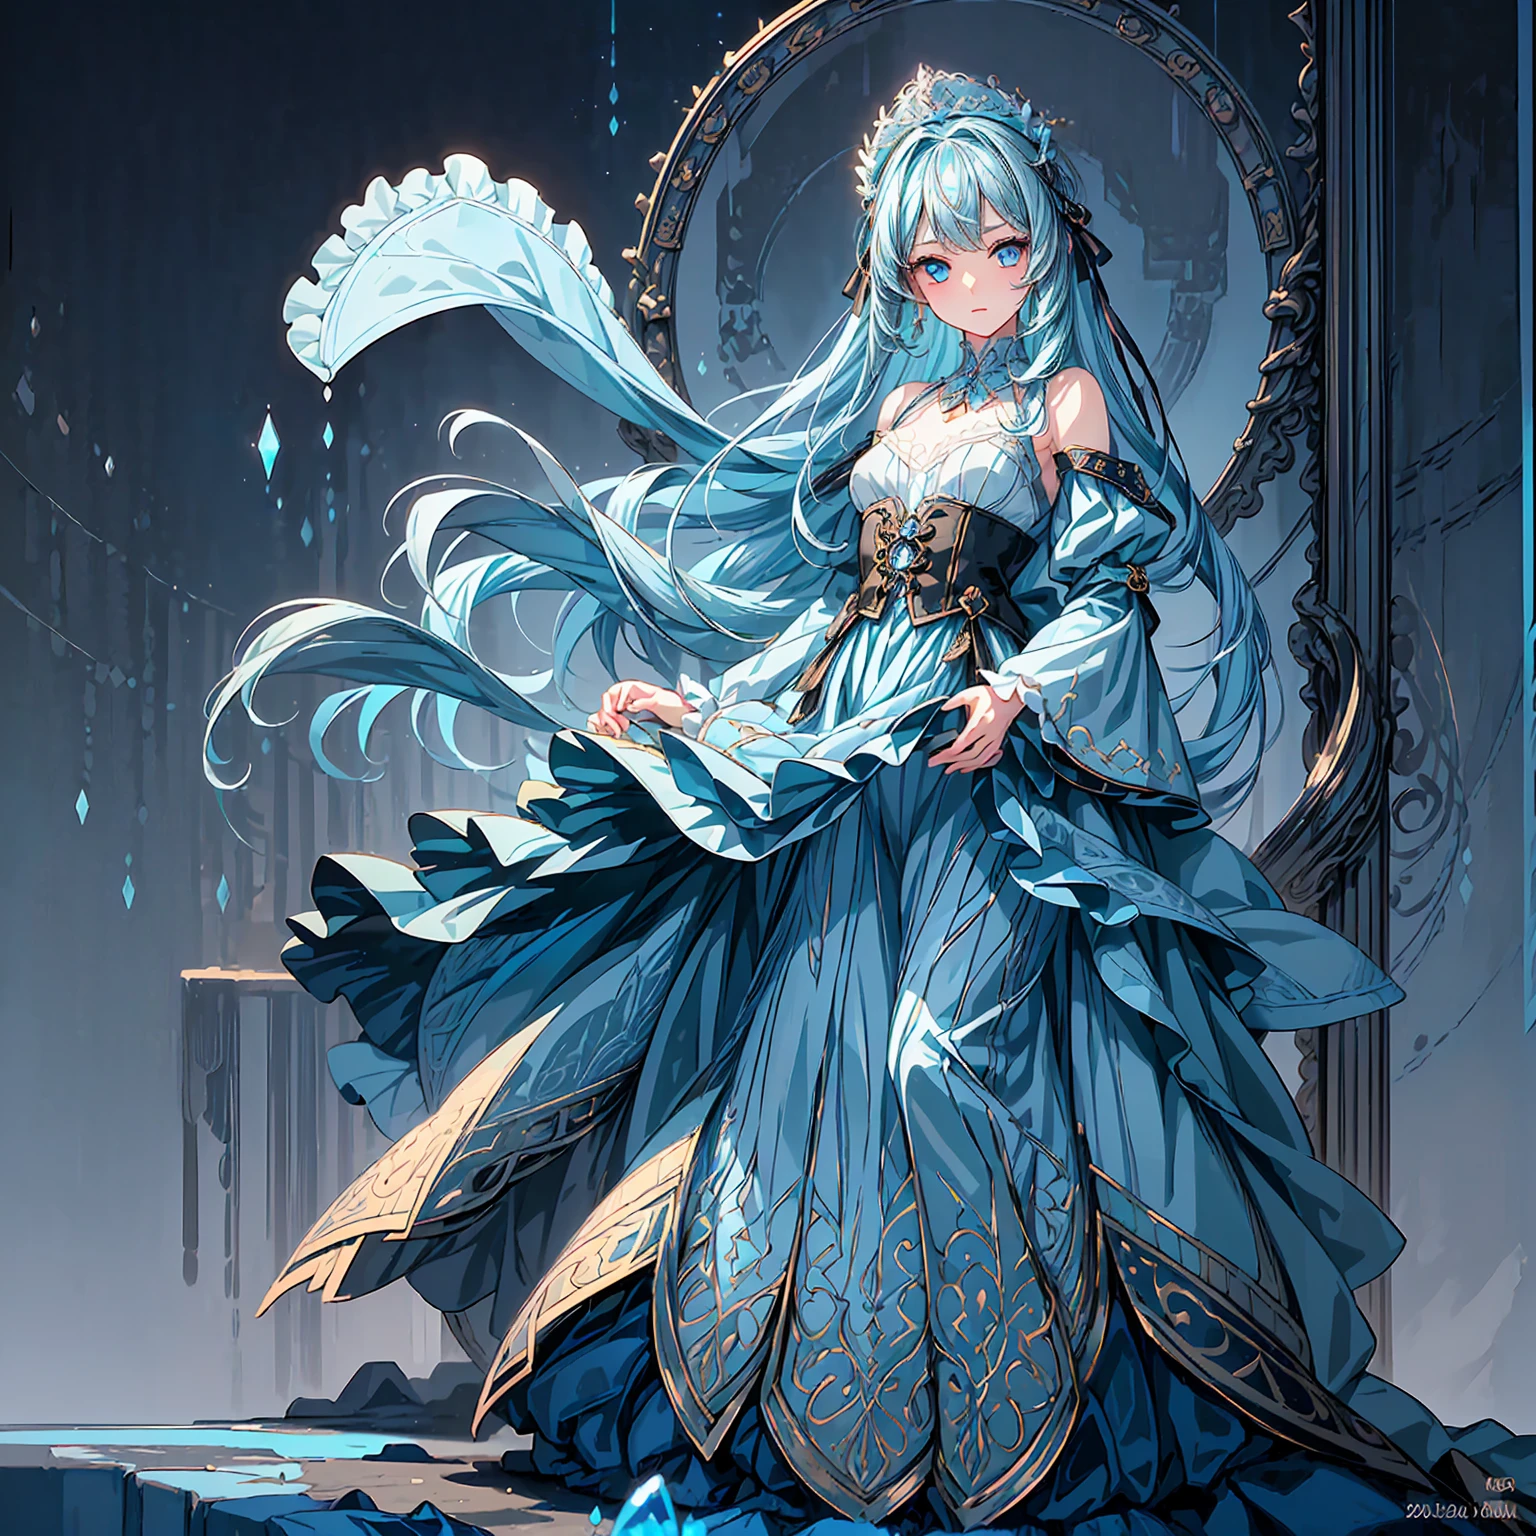 masterpiece, best quality, extremely detailed, (illustration, official art:1.1), 1 girl ,(((( light blue long hair)))), ,(((( light blue long hair)))),light blue hair, ,10 years old, long hair ((blush)) , cute face, big eyes, masterpiece, best quality,(((((a very delicate and beautiful girl))))),Amazing,beautiful detailed eyes,blunt bangs((((little delicate girl)))),tareme(true beautiful:1.2), sense of depth,dynamic angle,,,, affectionate smile, (true beautiful:1.2),,(tiny 1girl model:1.2),)(flat chest)),(((masterpiece, best quality, 8k resolution, sharp focus,(Masterpiece), (Masterpiece), (Best quality), (1 girl)), Amazing, Beautiful detail eyes, Fine details, Depth of field, Original, ((Best quality)), ((Super detailed)), (Best Illustration), (BEST lighting, Best shadow), (Very delicate and beautiful)), Very detailed wallpaper, Dream background, landscape, young girl, , full bodyesbian, Single, , Gothic, Sapphire eyes, long and flowing hair，Paired with half a sapphire, ahoge, Wavy shoulder-length sapphire hair, Sapphire hair accessories , Blue rose
,full body